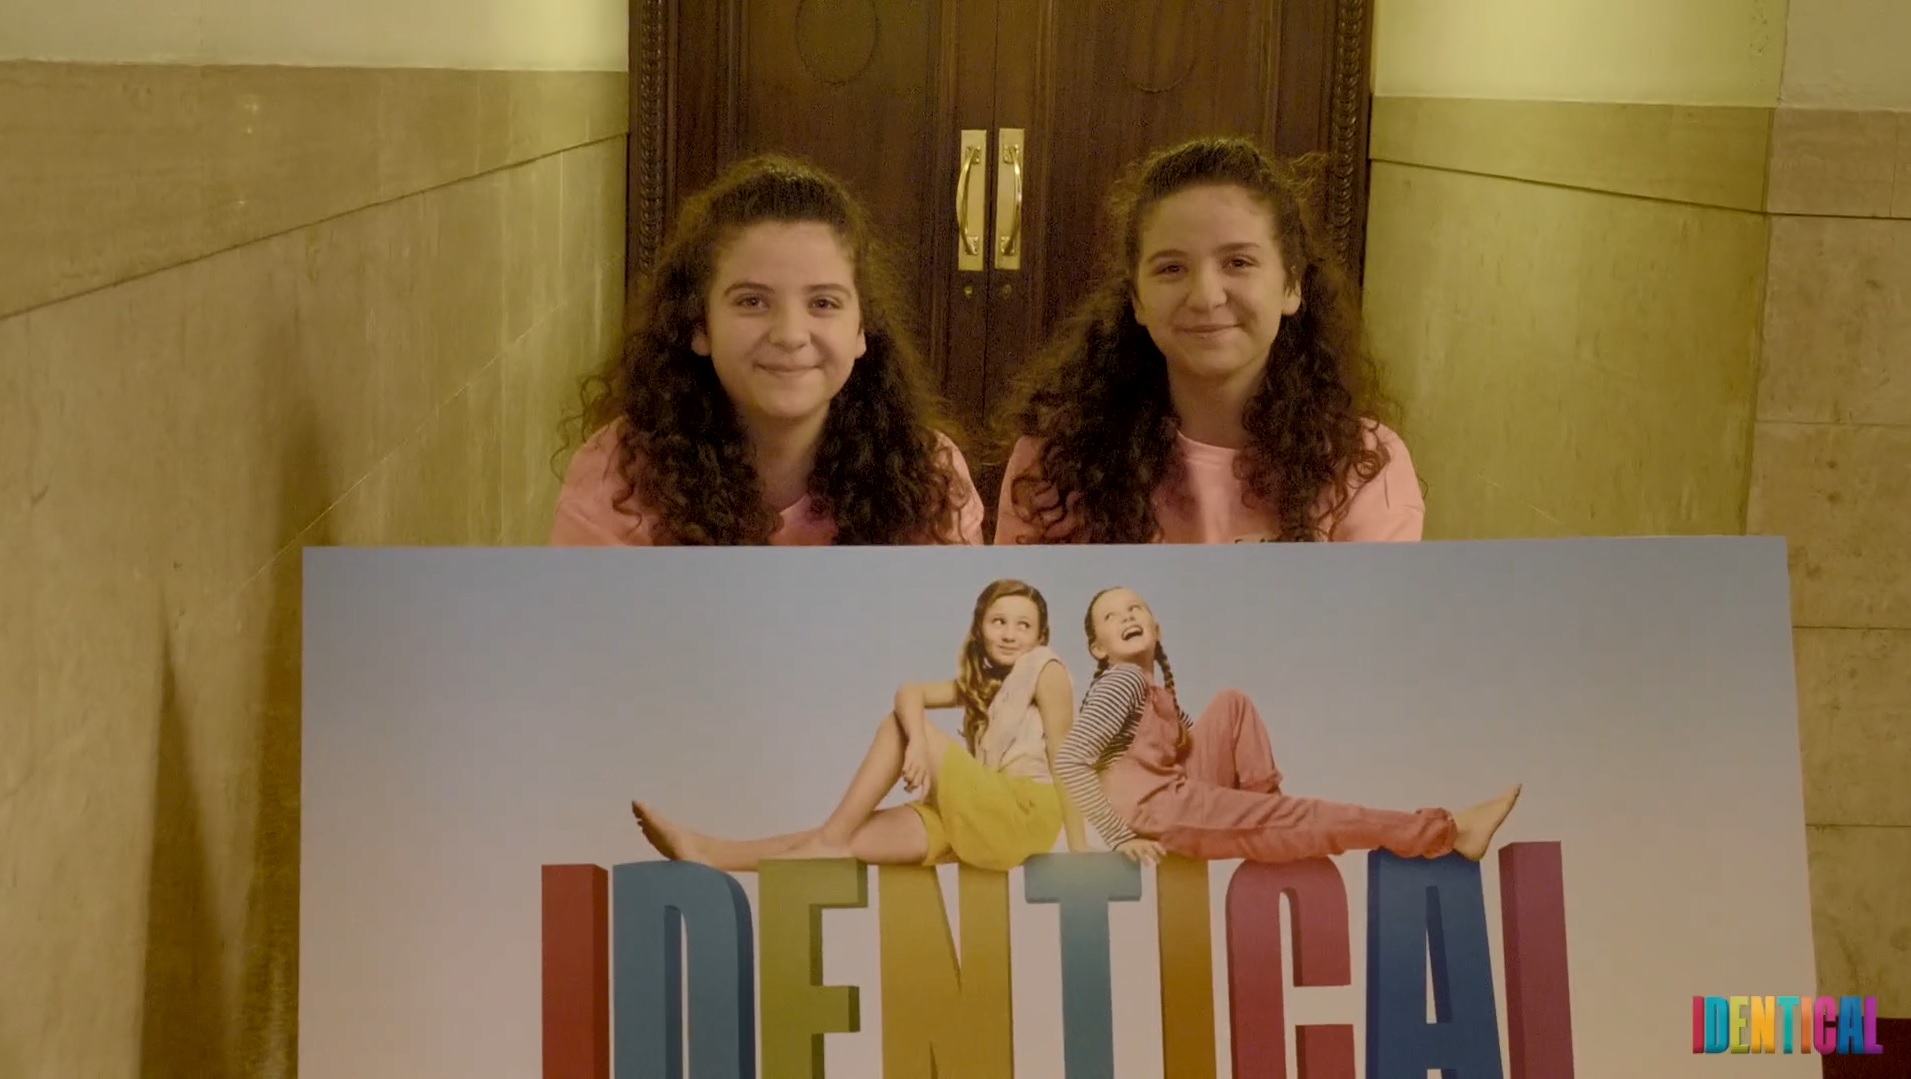 Watch some footage from our twin auditions!